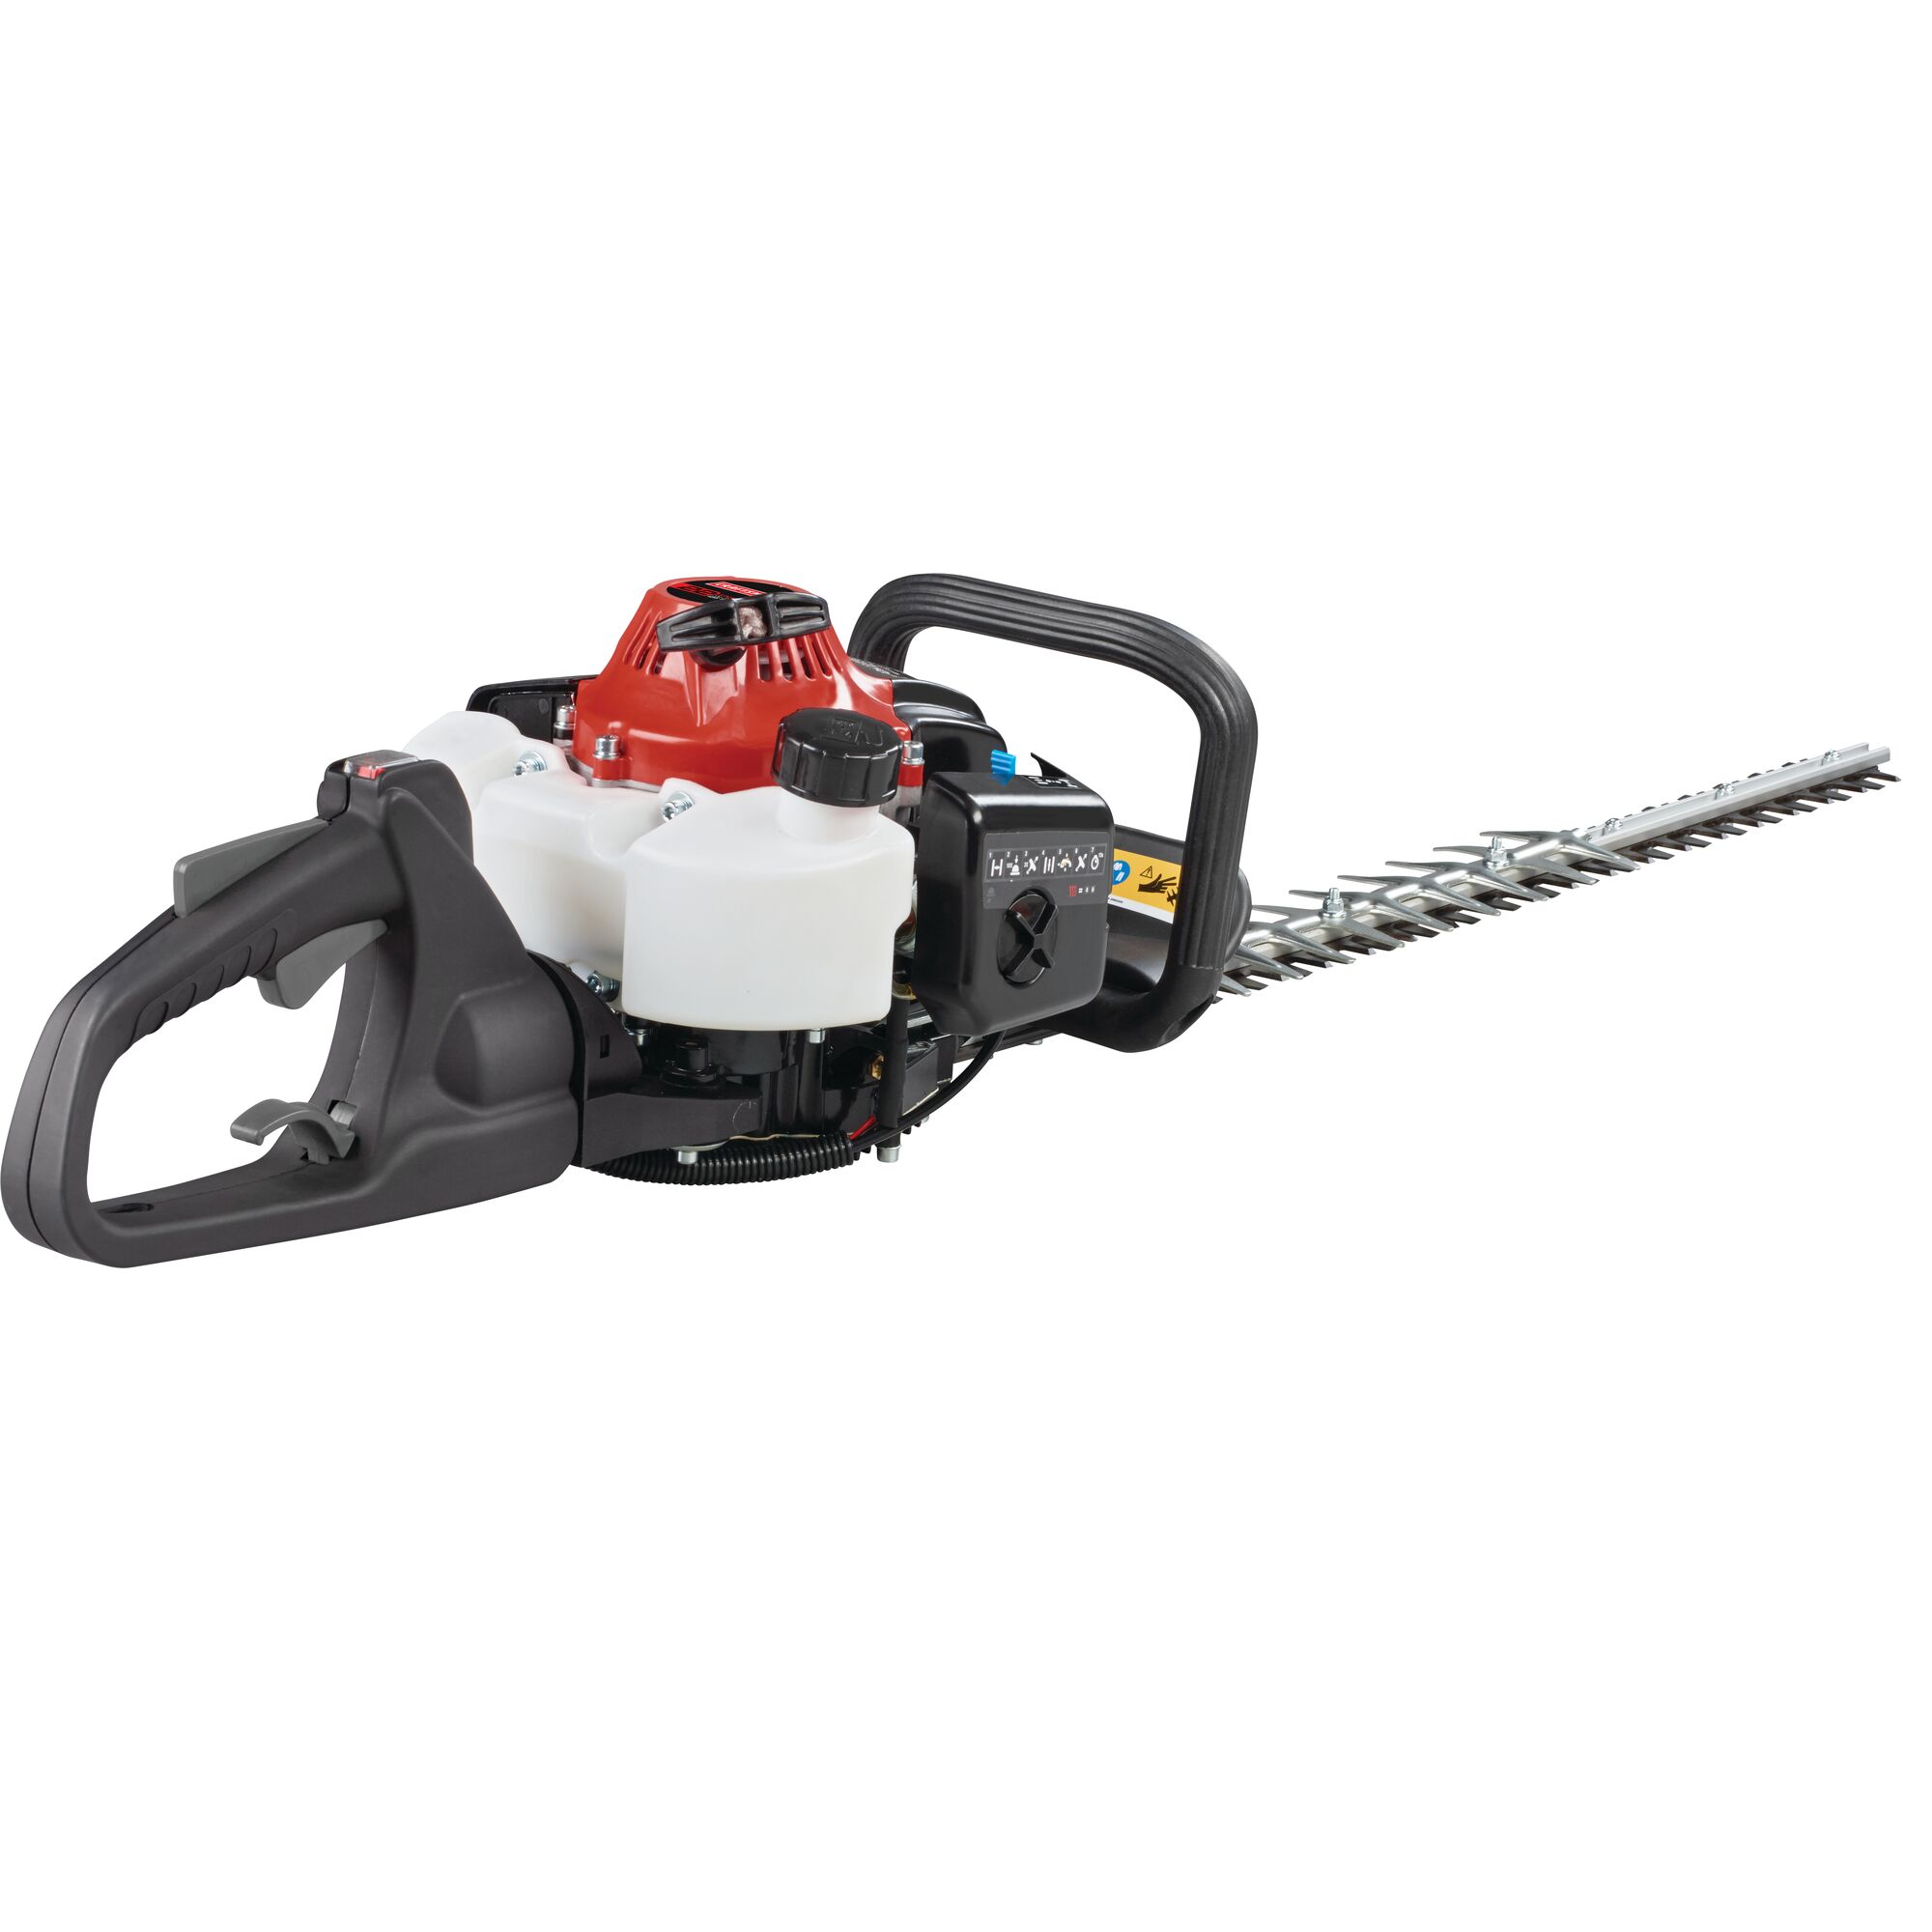 Profile of 22 inch 2 cycle gas hedge trimmer.